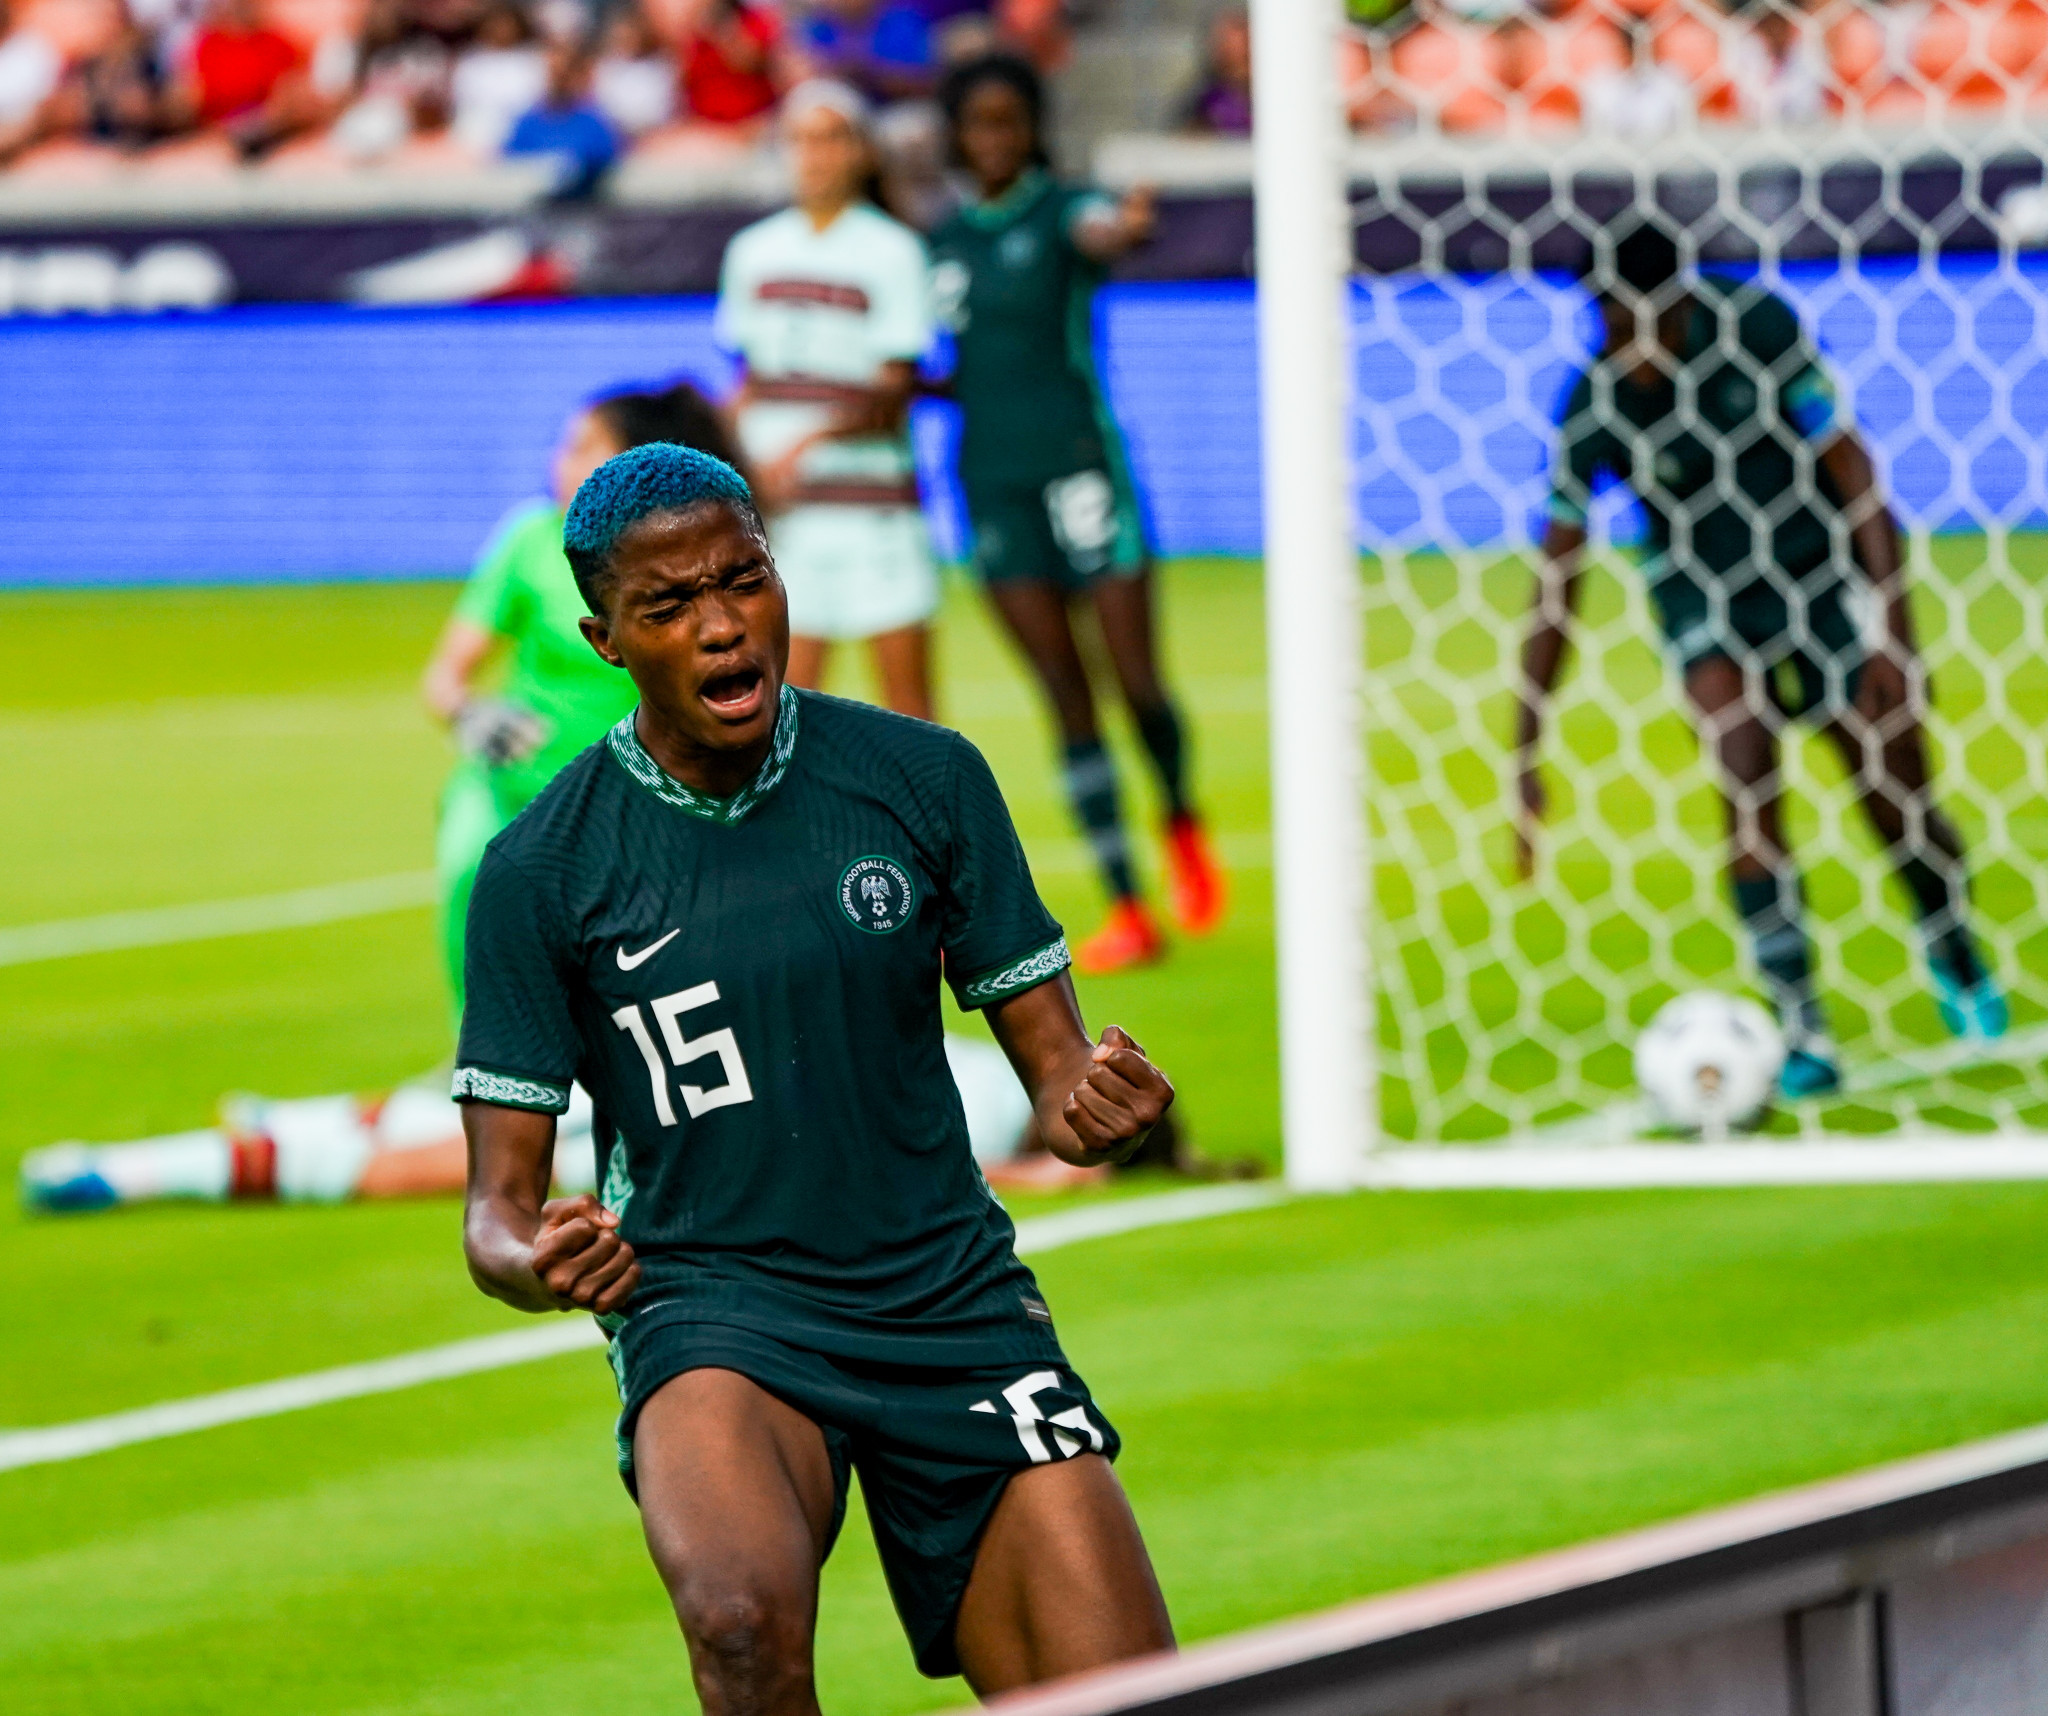 Nigeria and South Africa earn narrow wins to reach Women’s Africa Cup of Nations semi-finals